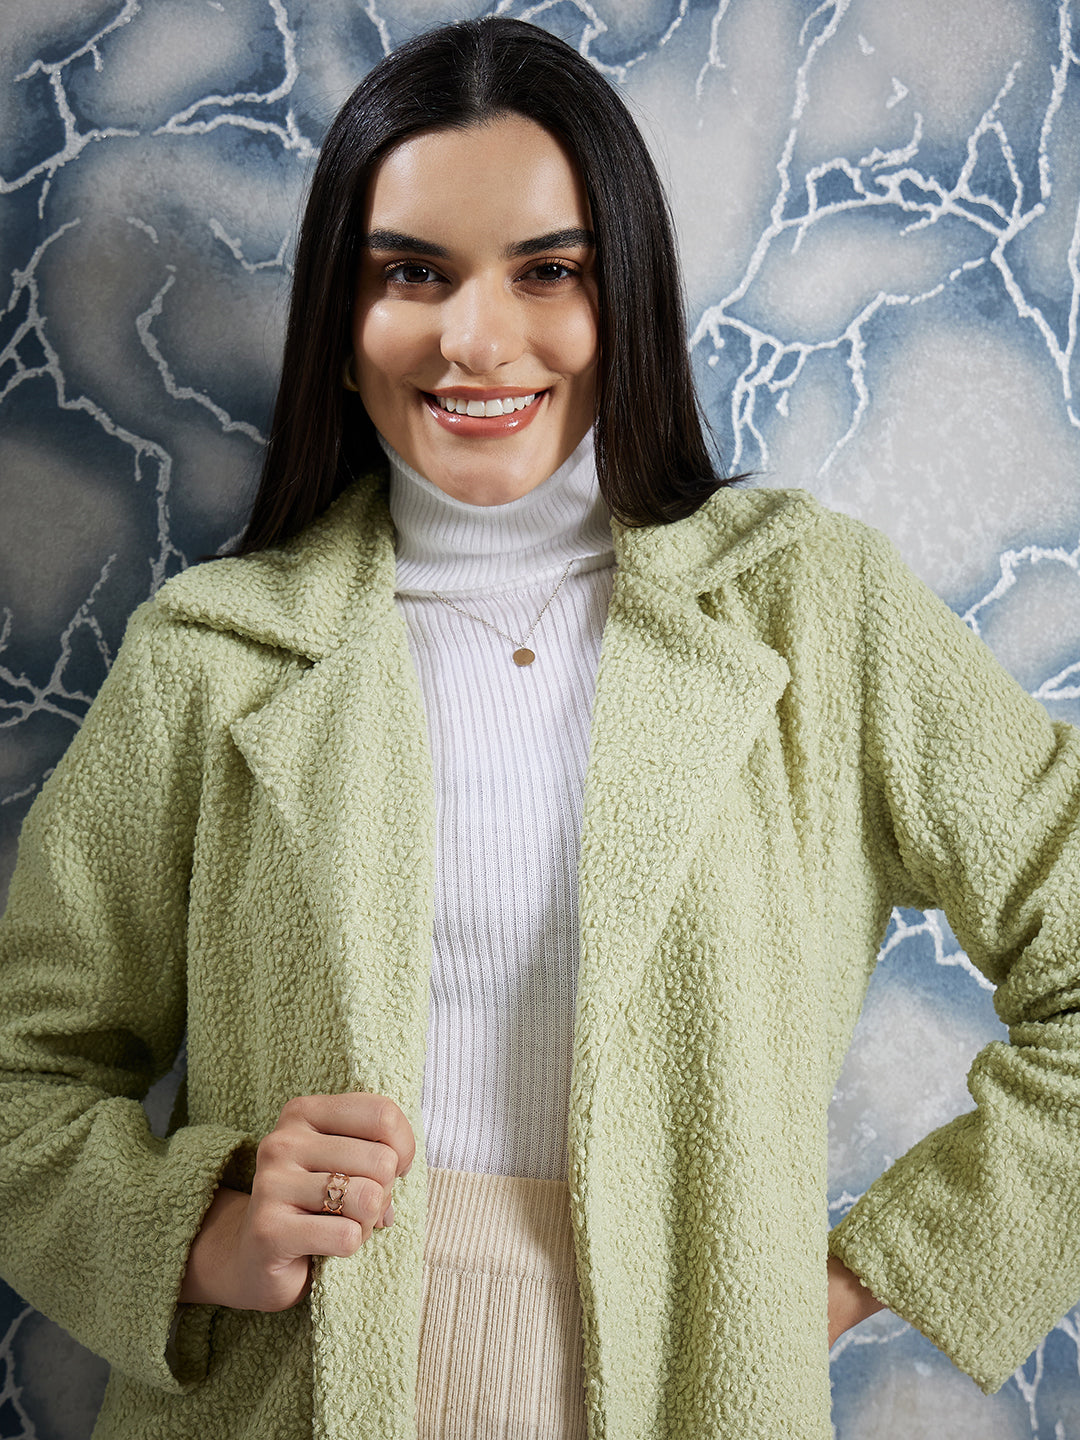 Athena Green Front Open Textured Over Coat